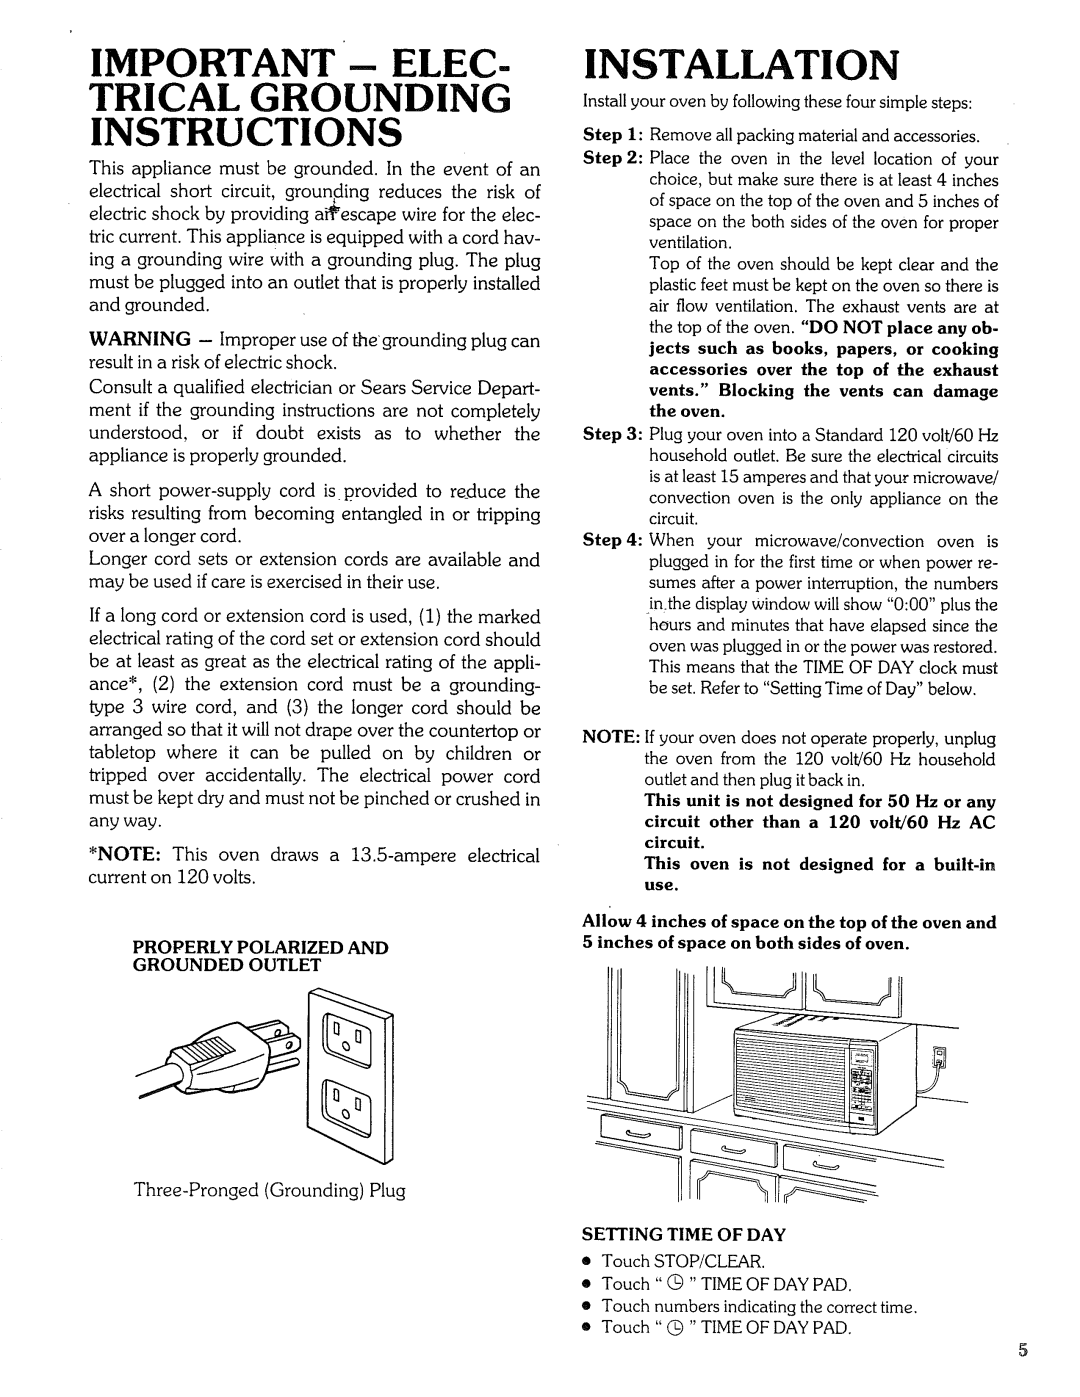 Sears Microwave Oven manual Installation, vents. Blocking the vents can damage the oven 